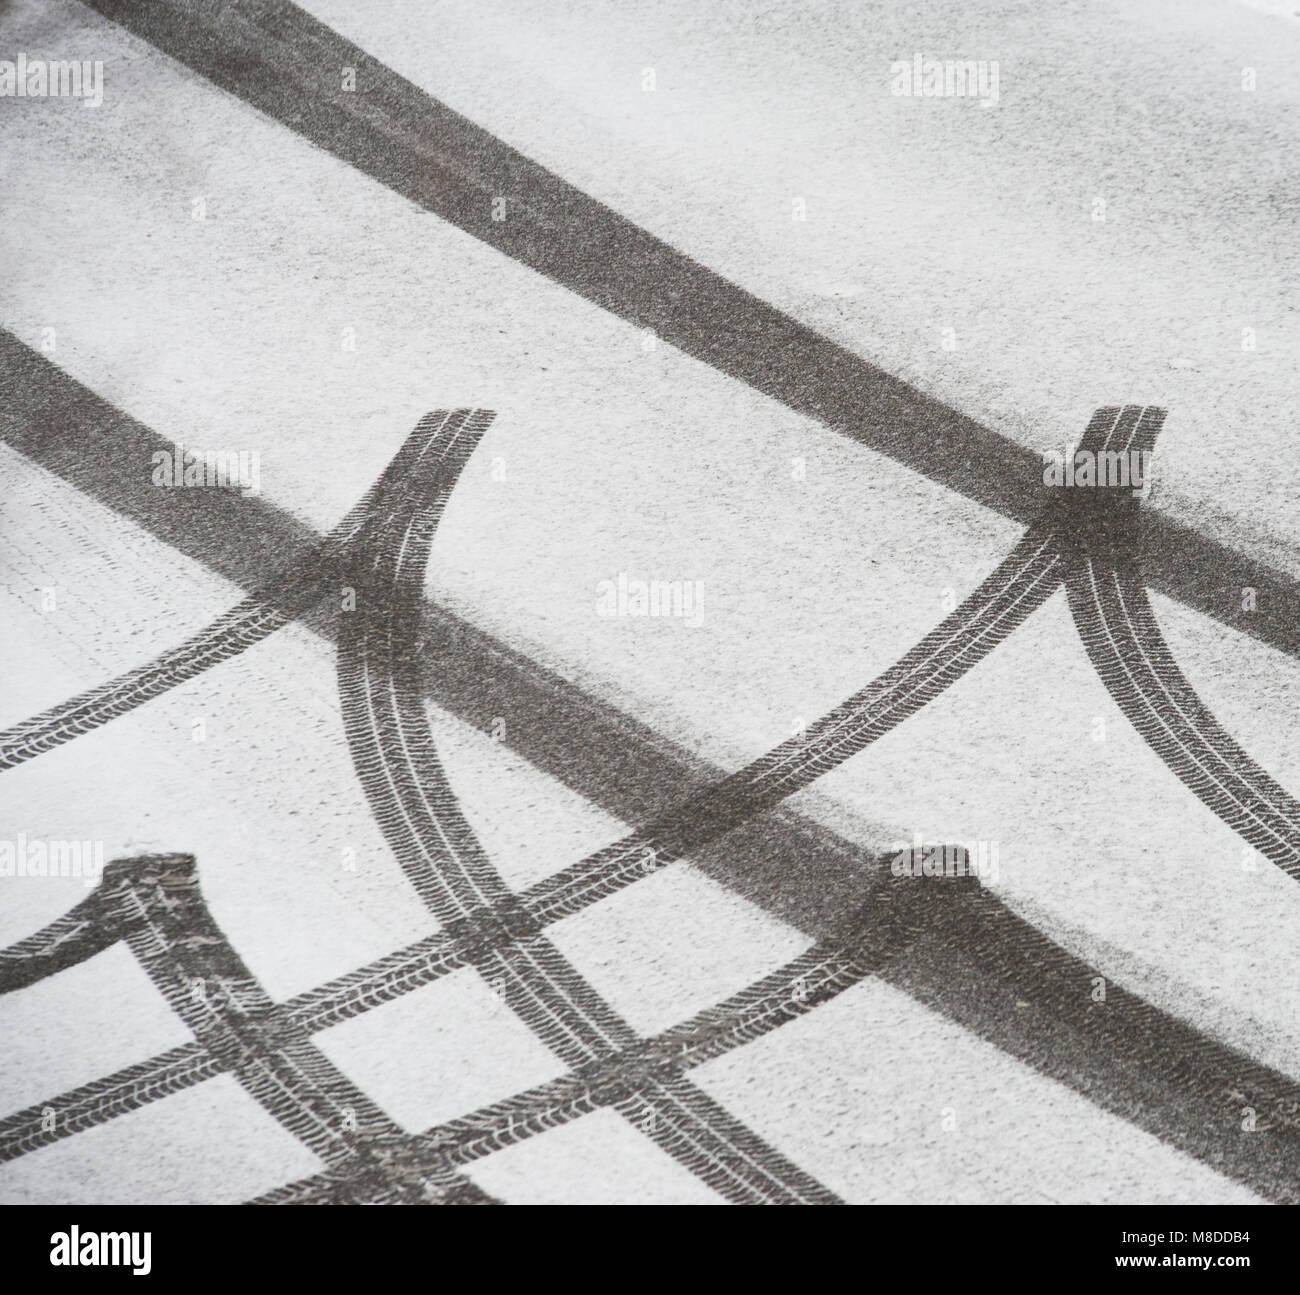 Skidmarks from a car in the fresh snow on a road Stock Photo